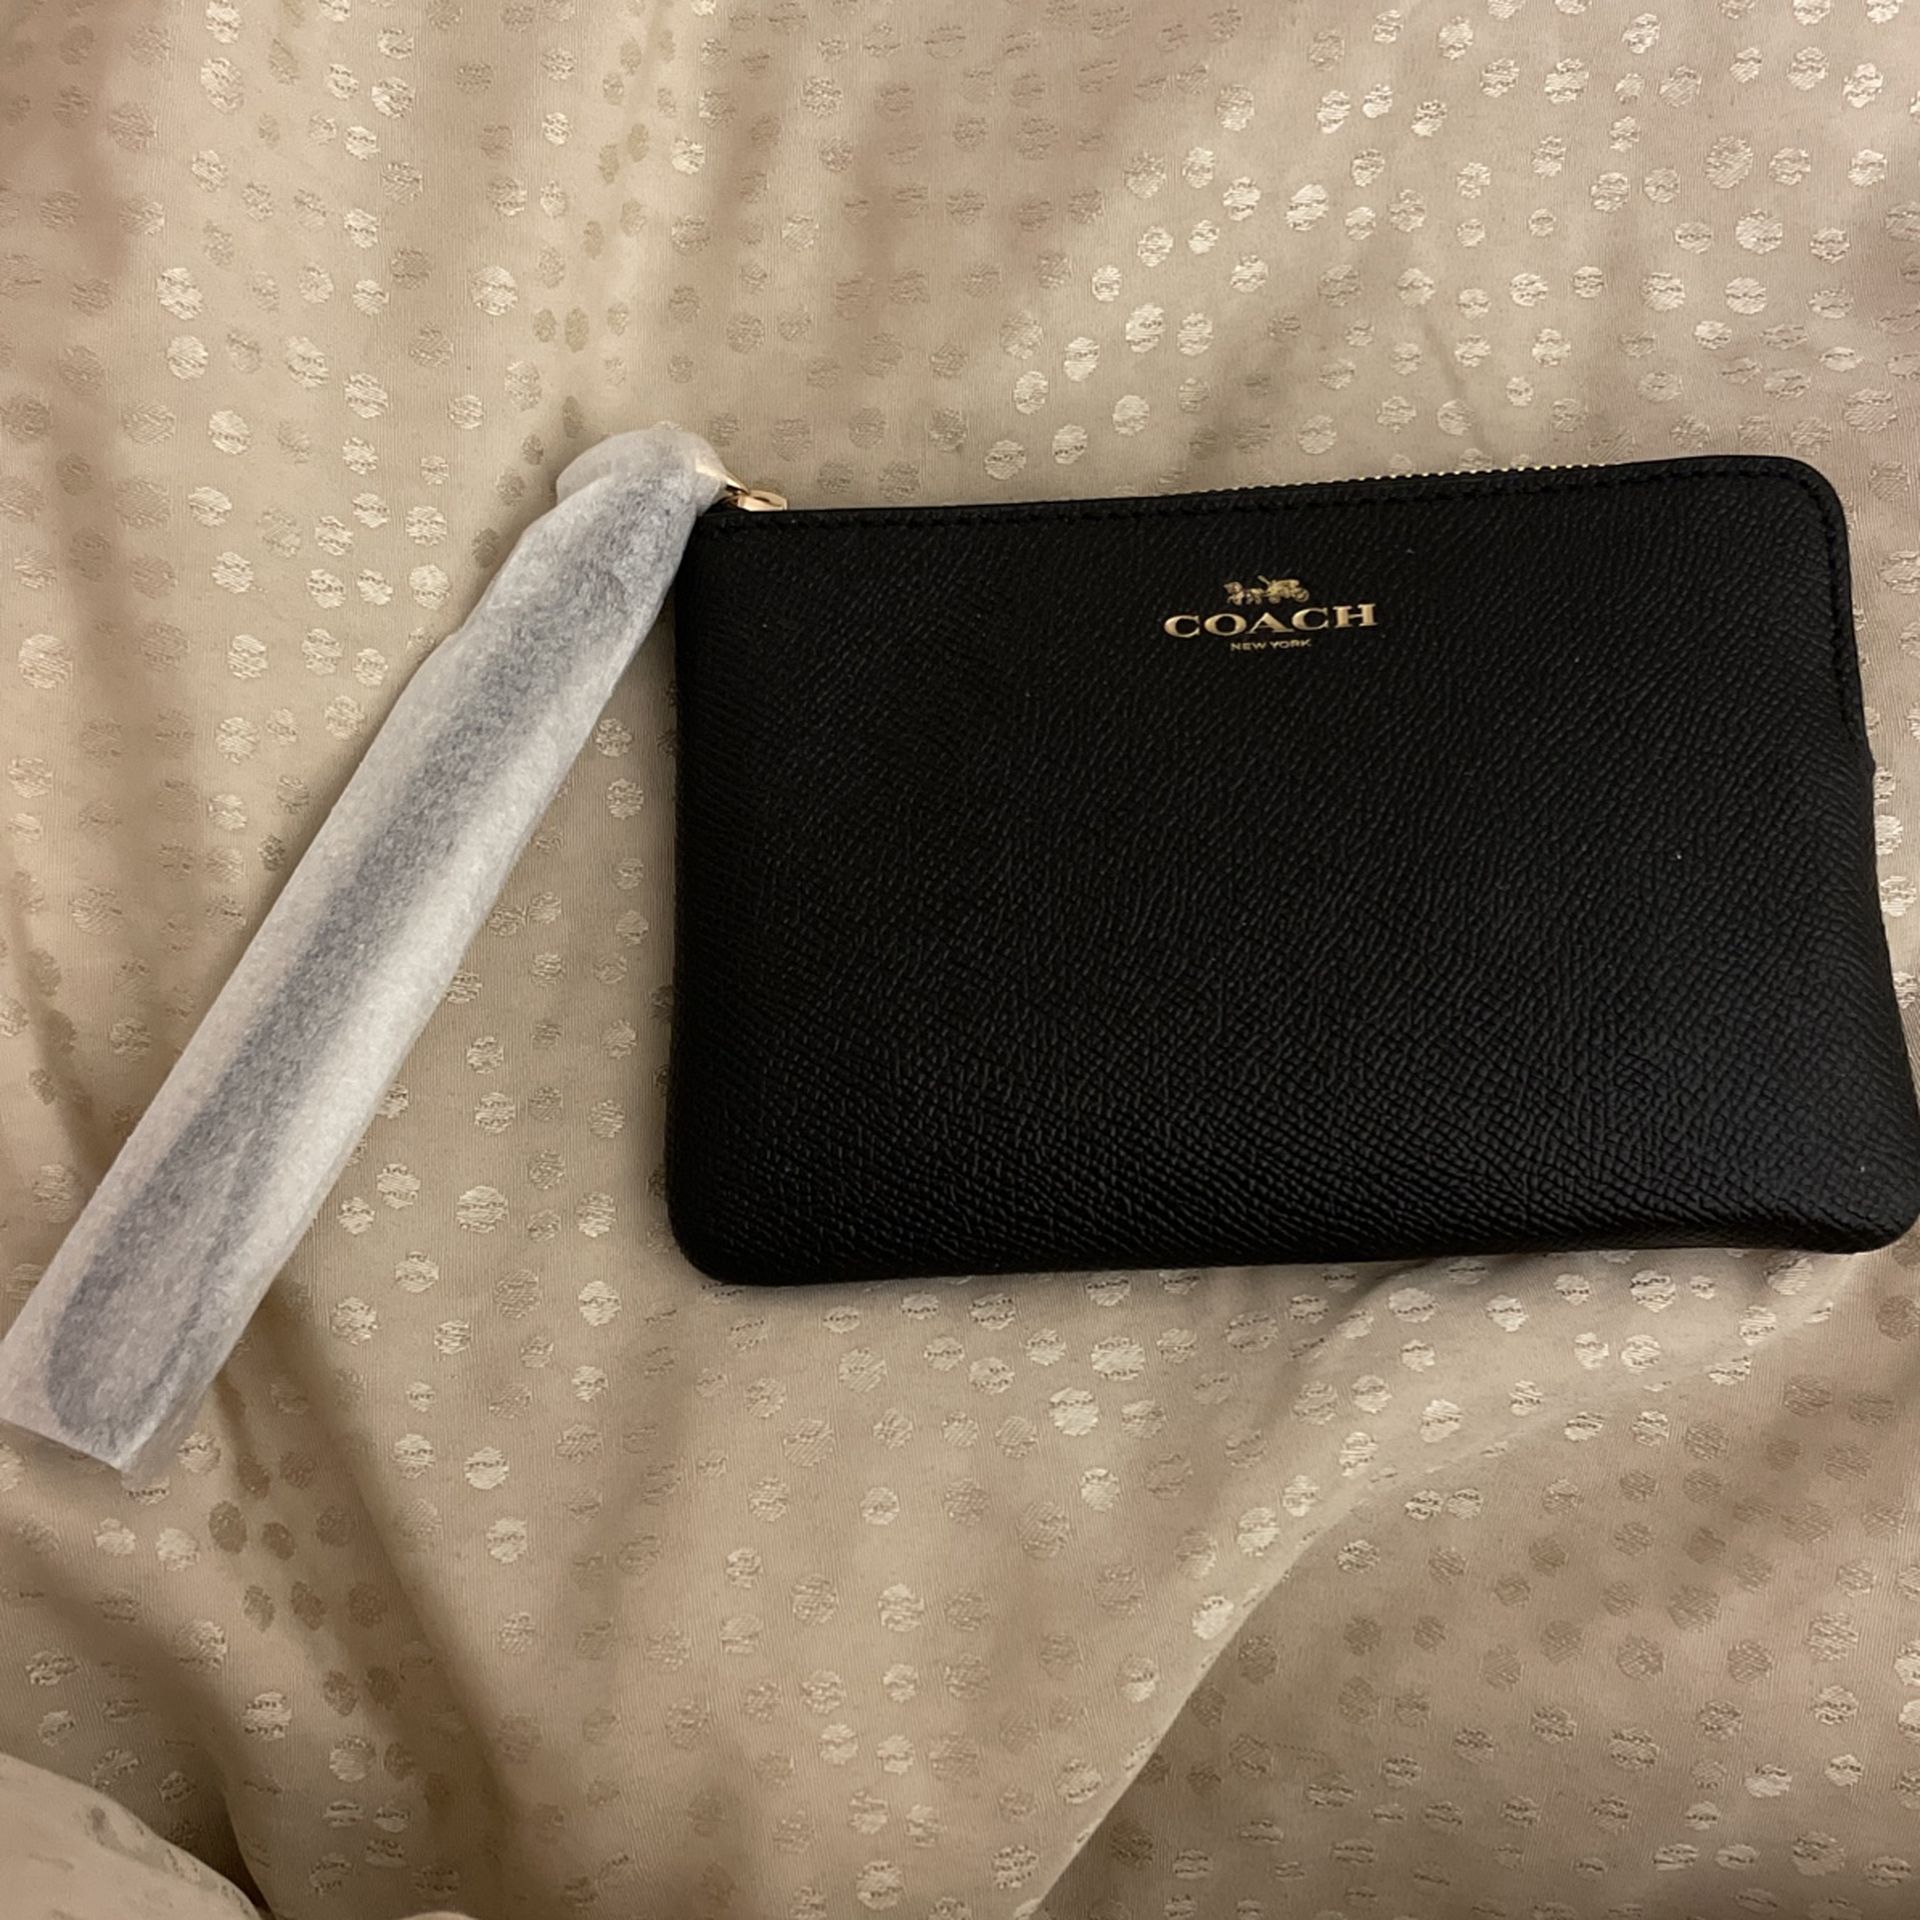 Authentic Coach small wristlet 